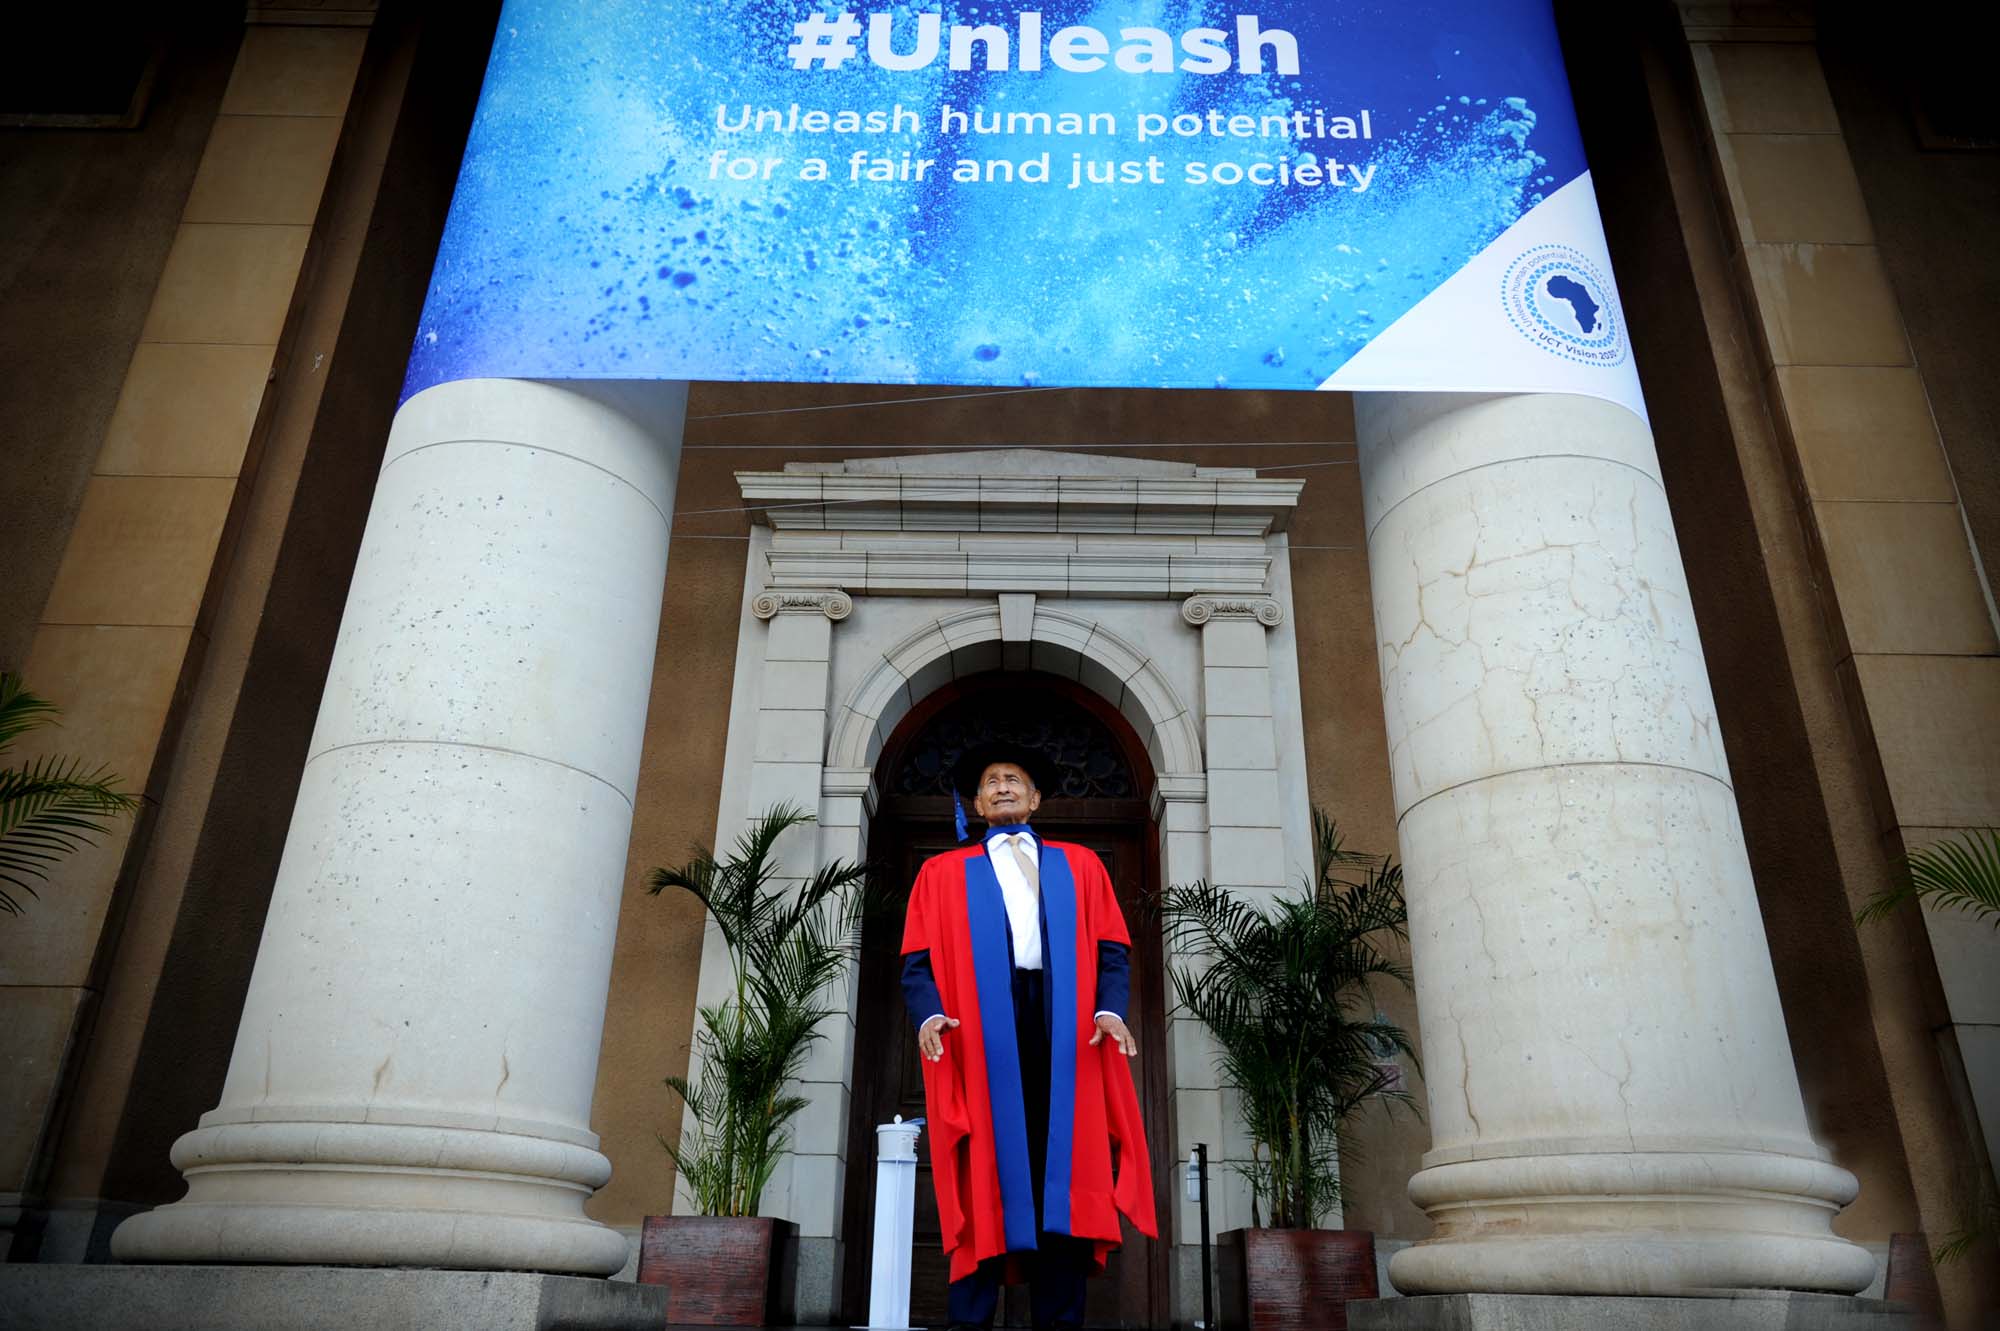 The virtual graduation ceremony for the Faculty of Humanities included the dean, Associate Professor Shose Kessi, UCT Registrar Royston Pillay, Vice-Chancellor Mamokgethi Phakeng and Chancellor Precious Moloi-Motsepe. An honorary doctorate was awarded to renowned South African ballet master, Johaar Mosaval.